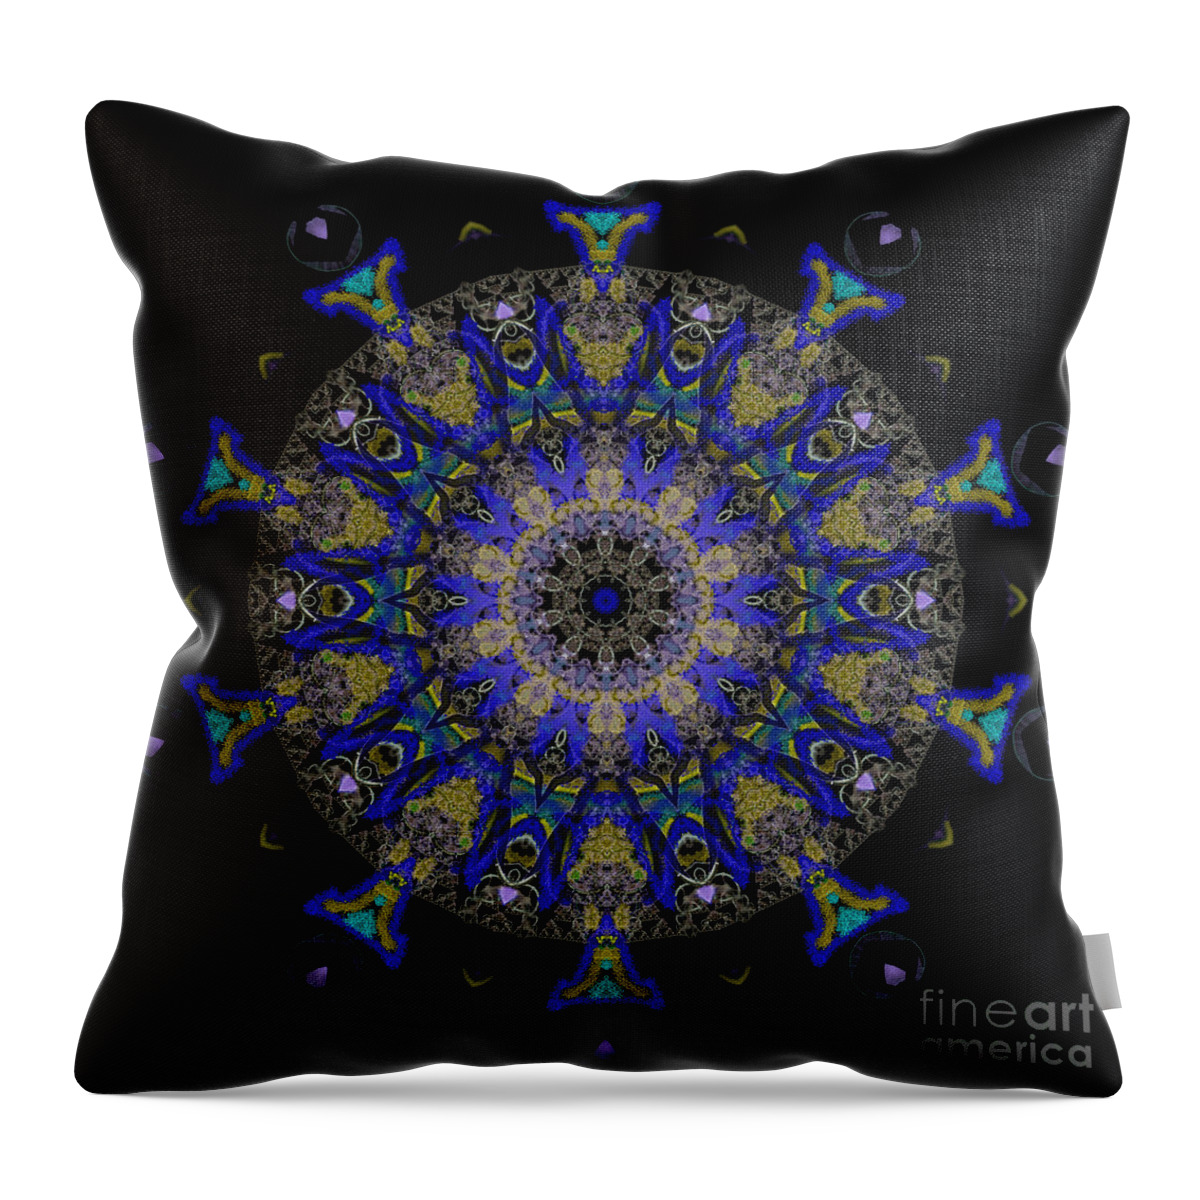 Apophysis Throw Pillow featuring the digital art Psycho Finesse by Rhonda Strickland